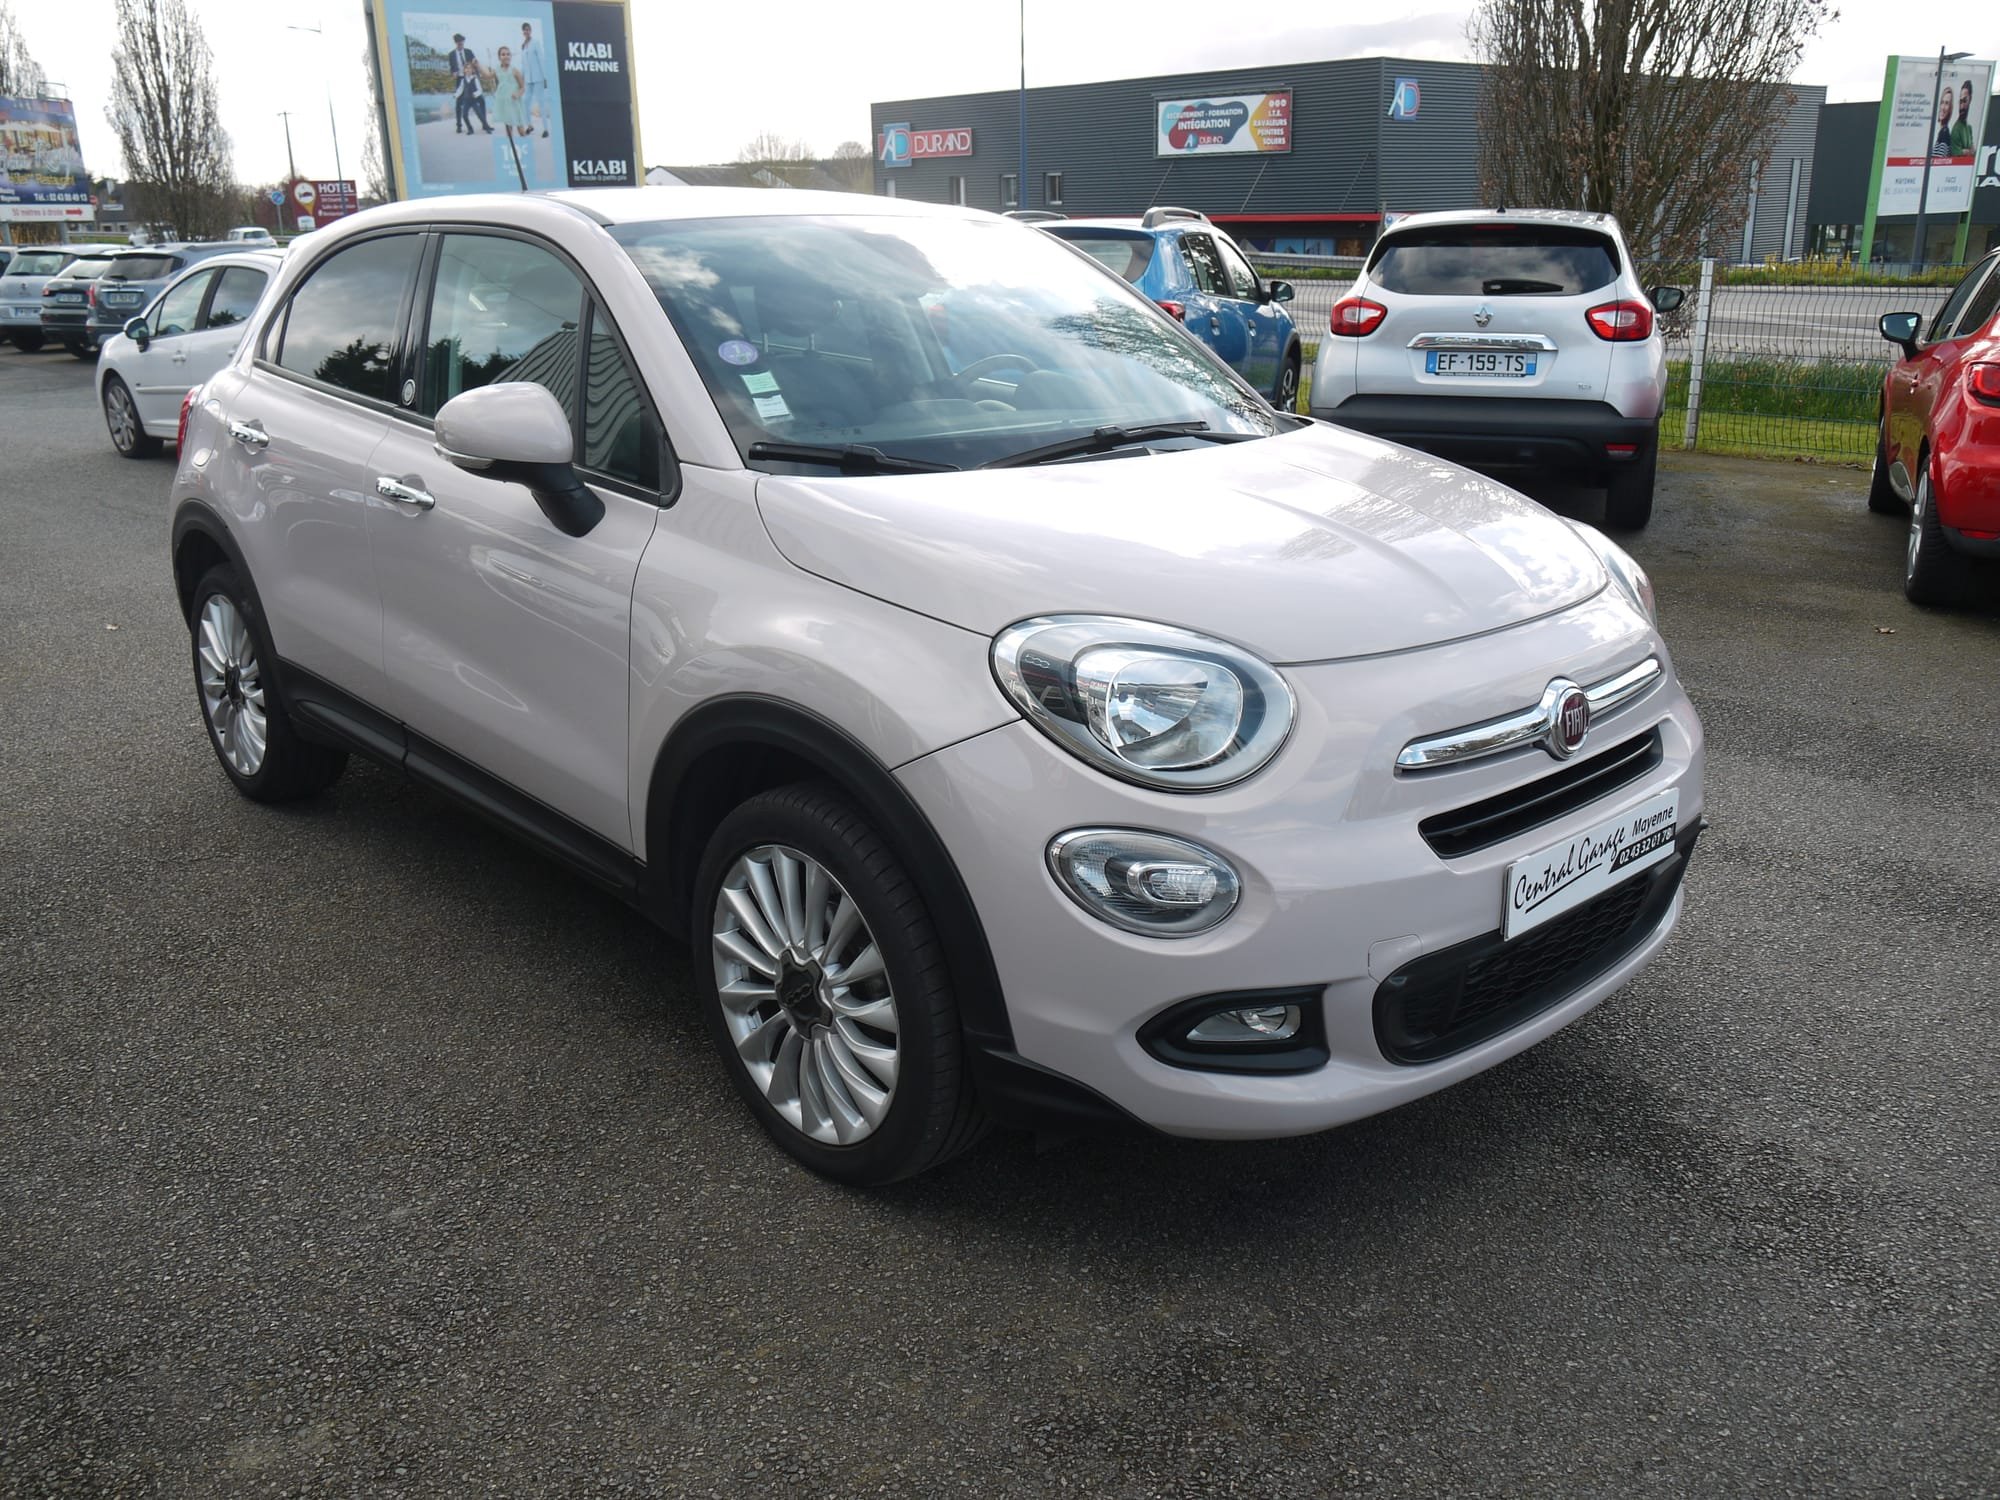 FIAT 500X 1.4L MULTIAIR 140CH OPENING EDITION